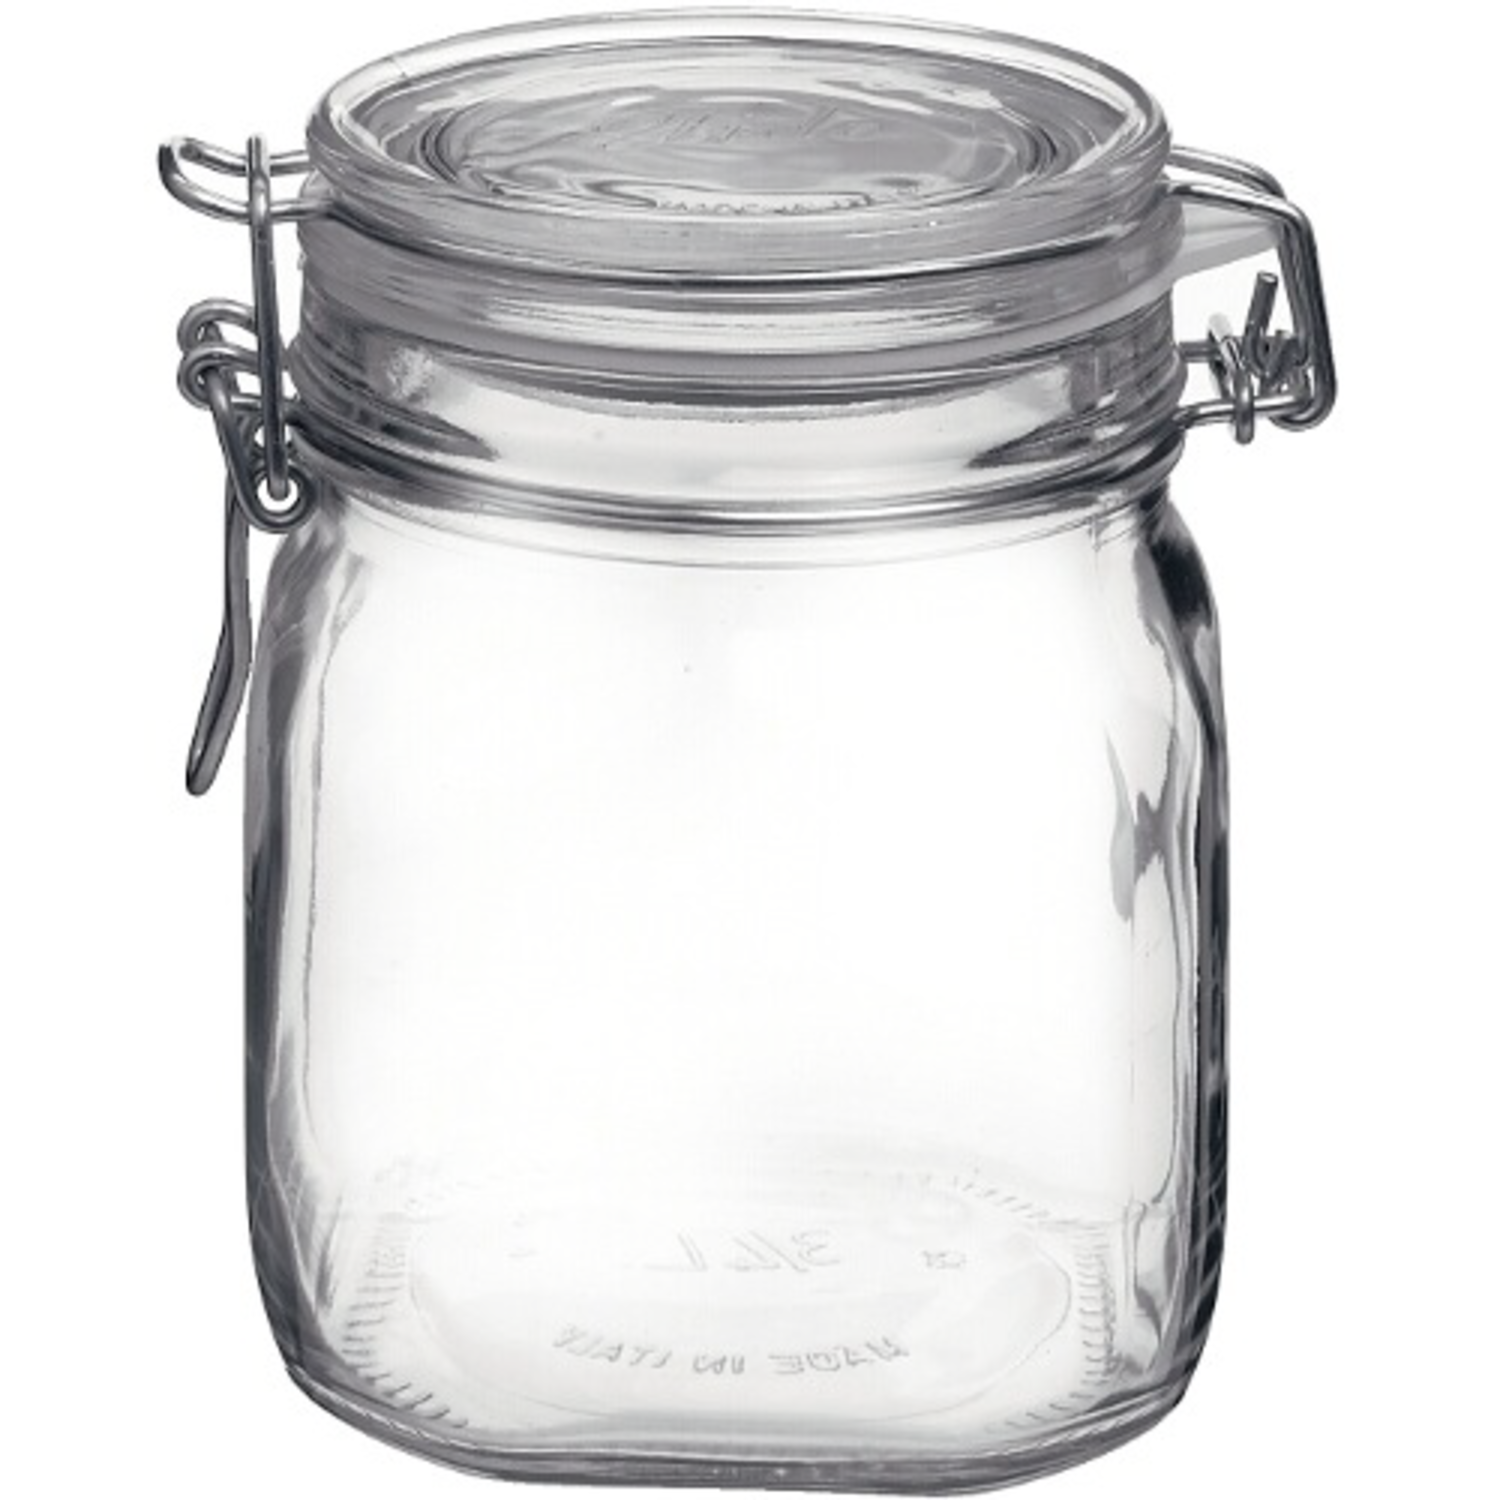 Fido 5-Liter Jar with Clamp Lid + Reviews